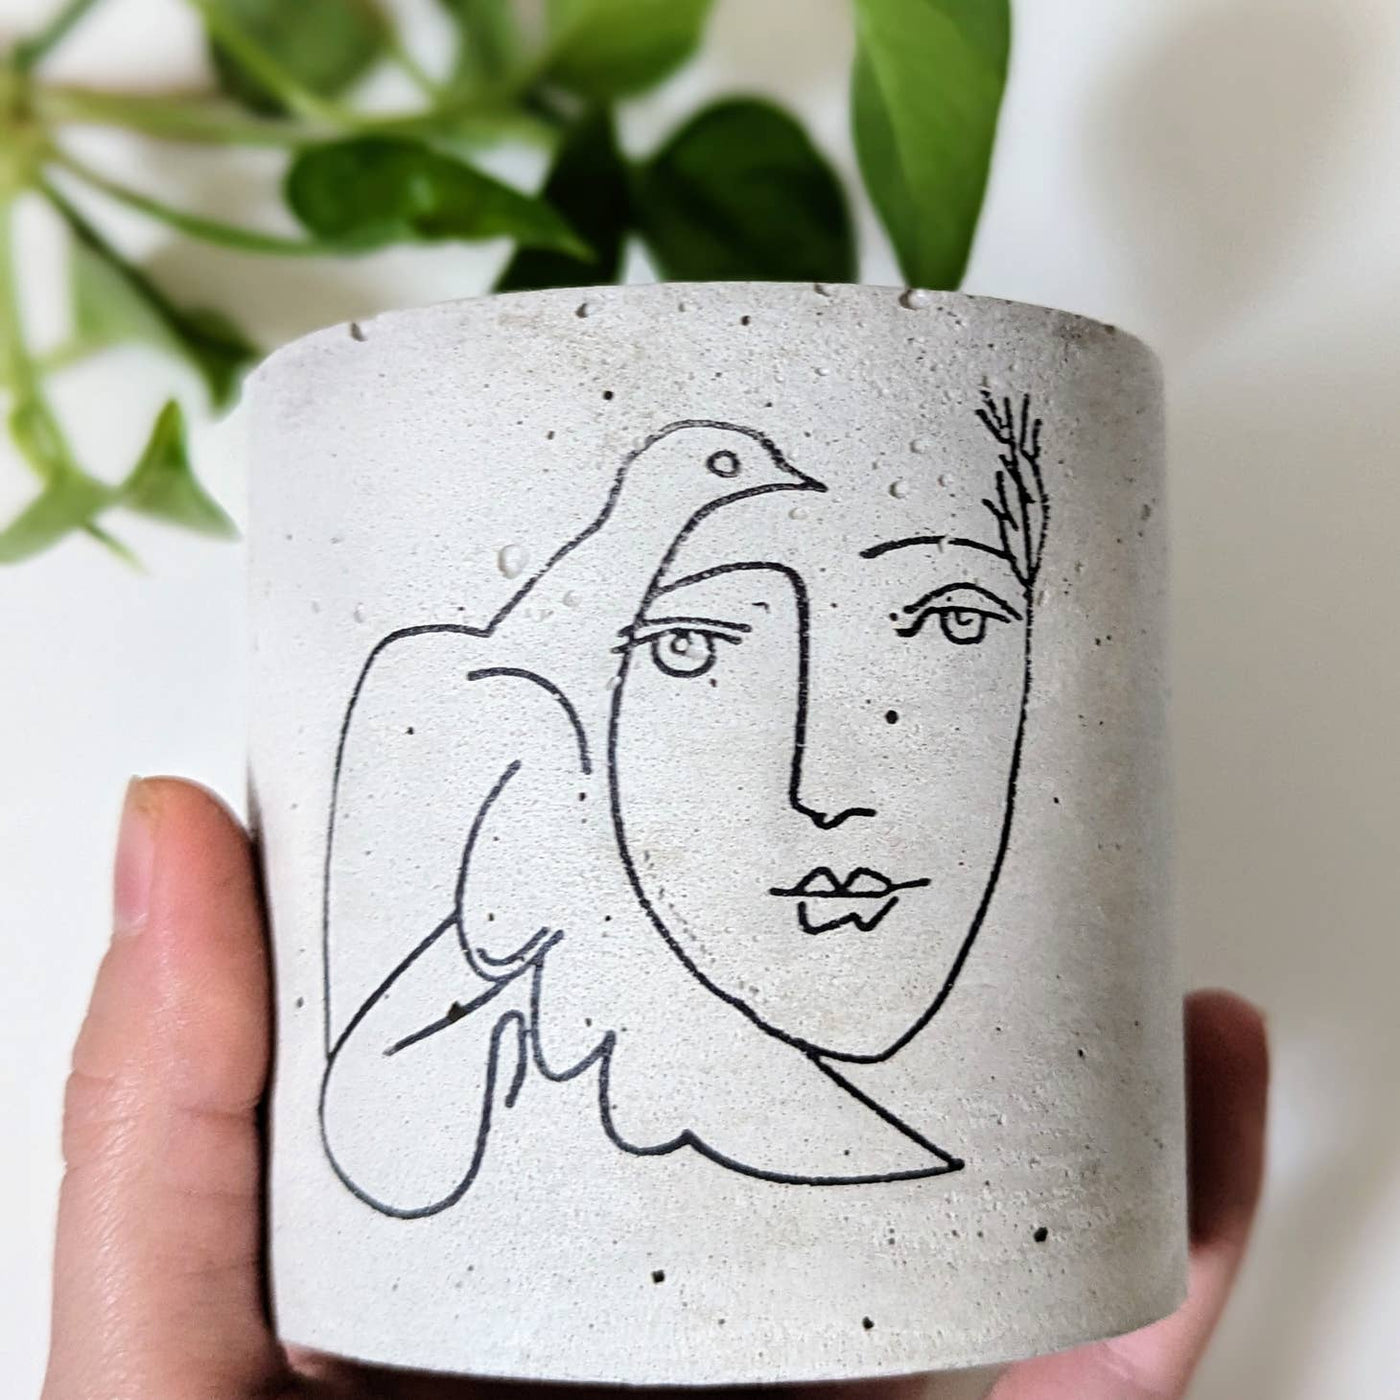 Picasso's dove and woman outline painted on a concrete planter